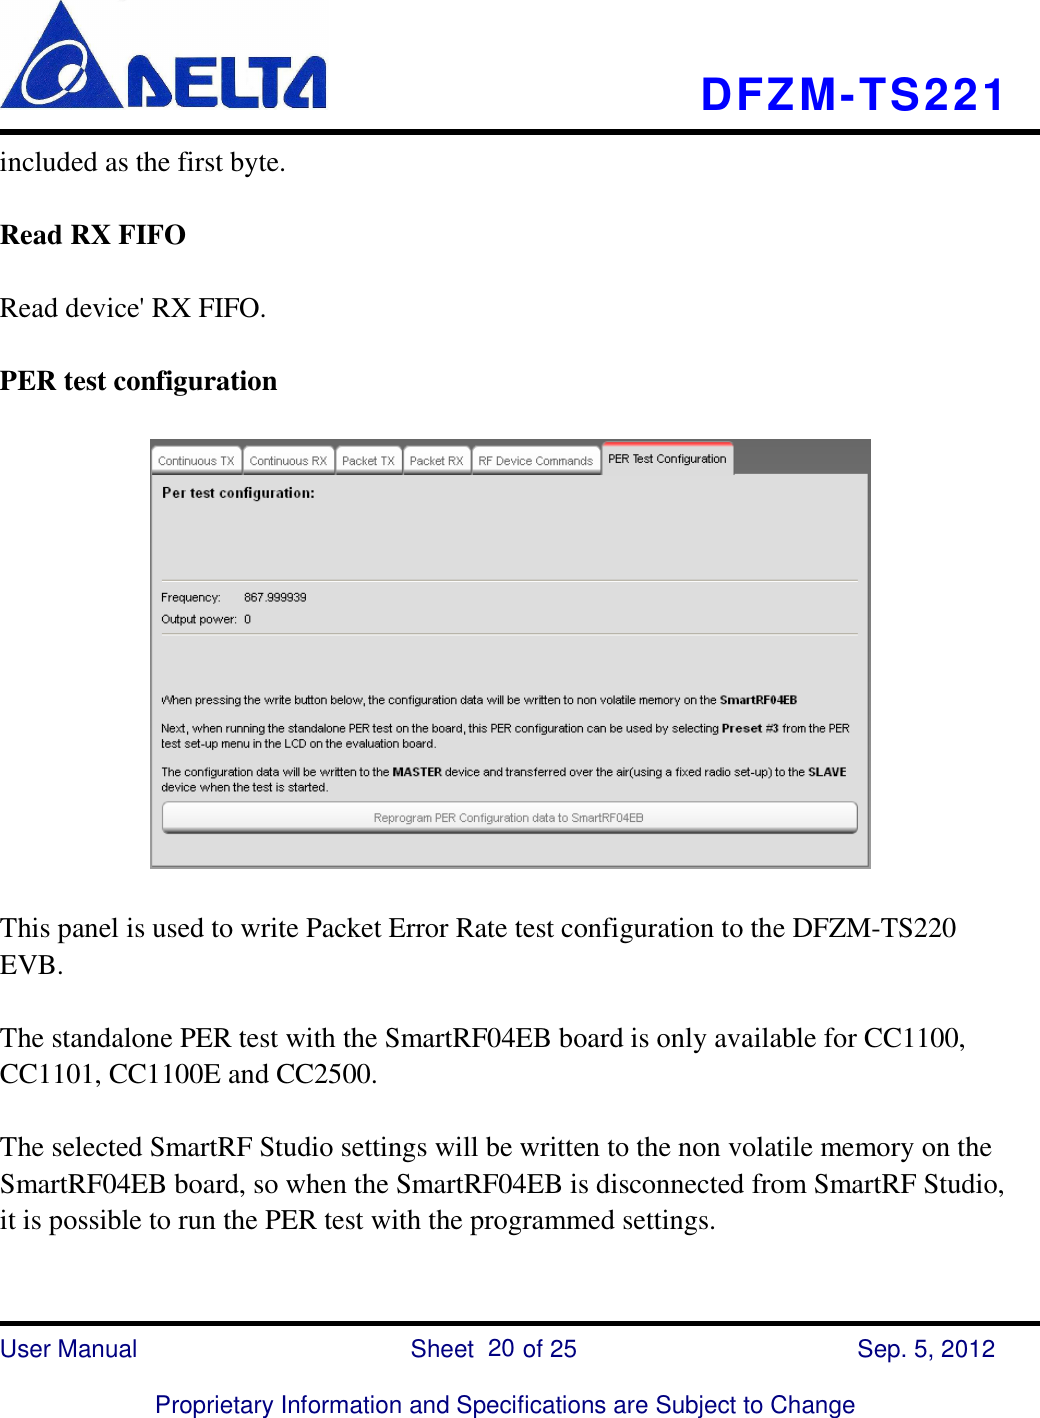    DFZM-TS221    User Manual                            Sheet        of 25      Sep. 5, 2012  Proprietary Information and Specifications are Subject to Change 20 included as the first byte.  Read RX FIFO  Read device&apos; RX FIFO.  PER test configuration    This panel is used to write Packet Error Rate test configuration to the DFZM-TS220 EVB.  The standalone PER test with the SmartRF04EB board is only available for CC1100, CC1101, CC1100E and CC2500.  The selected SmartRF Studio settings will be written to the non volatile memory on the SmartRF04EB board, so when the SmartRF04EB is disconnected from SmartRF Studio, it is possible to run the PER test with the programmed settings.  